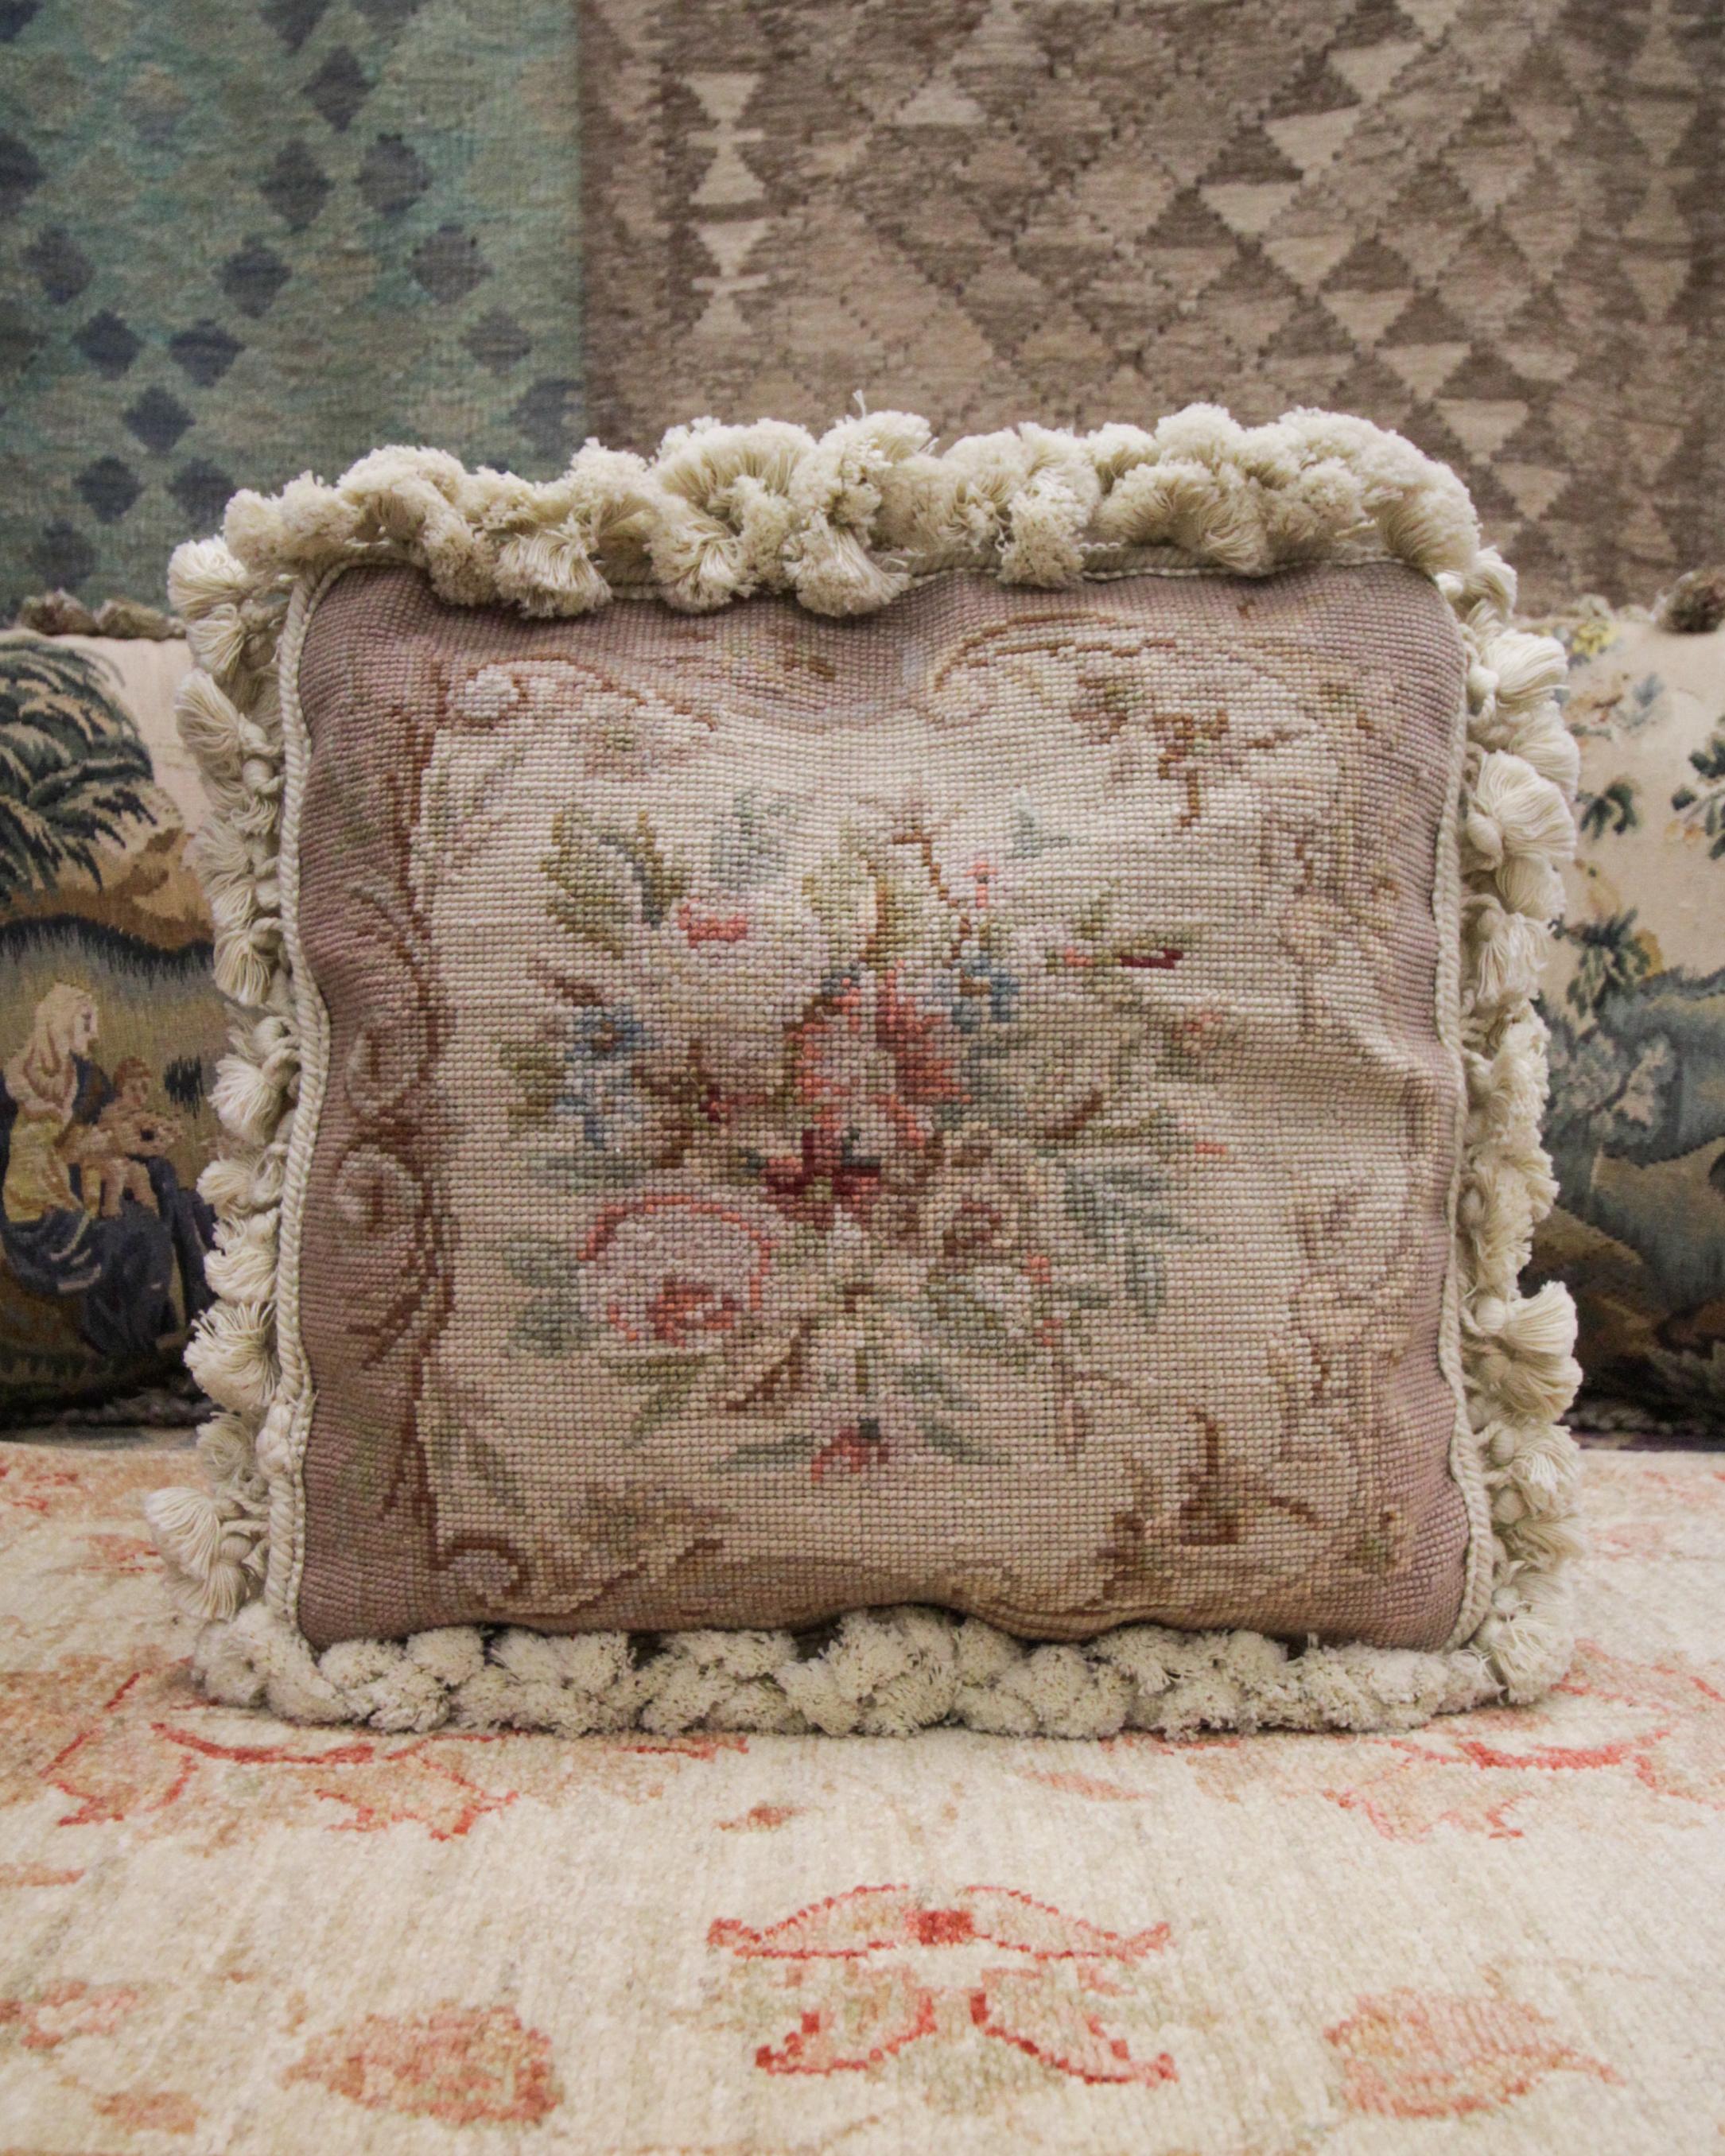 Chinese Vintage Floral Cushion Cover Beige Cream Sofa Armchair Scatter Pillow Case